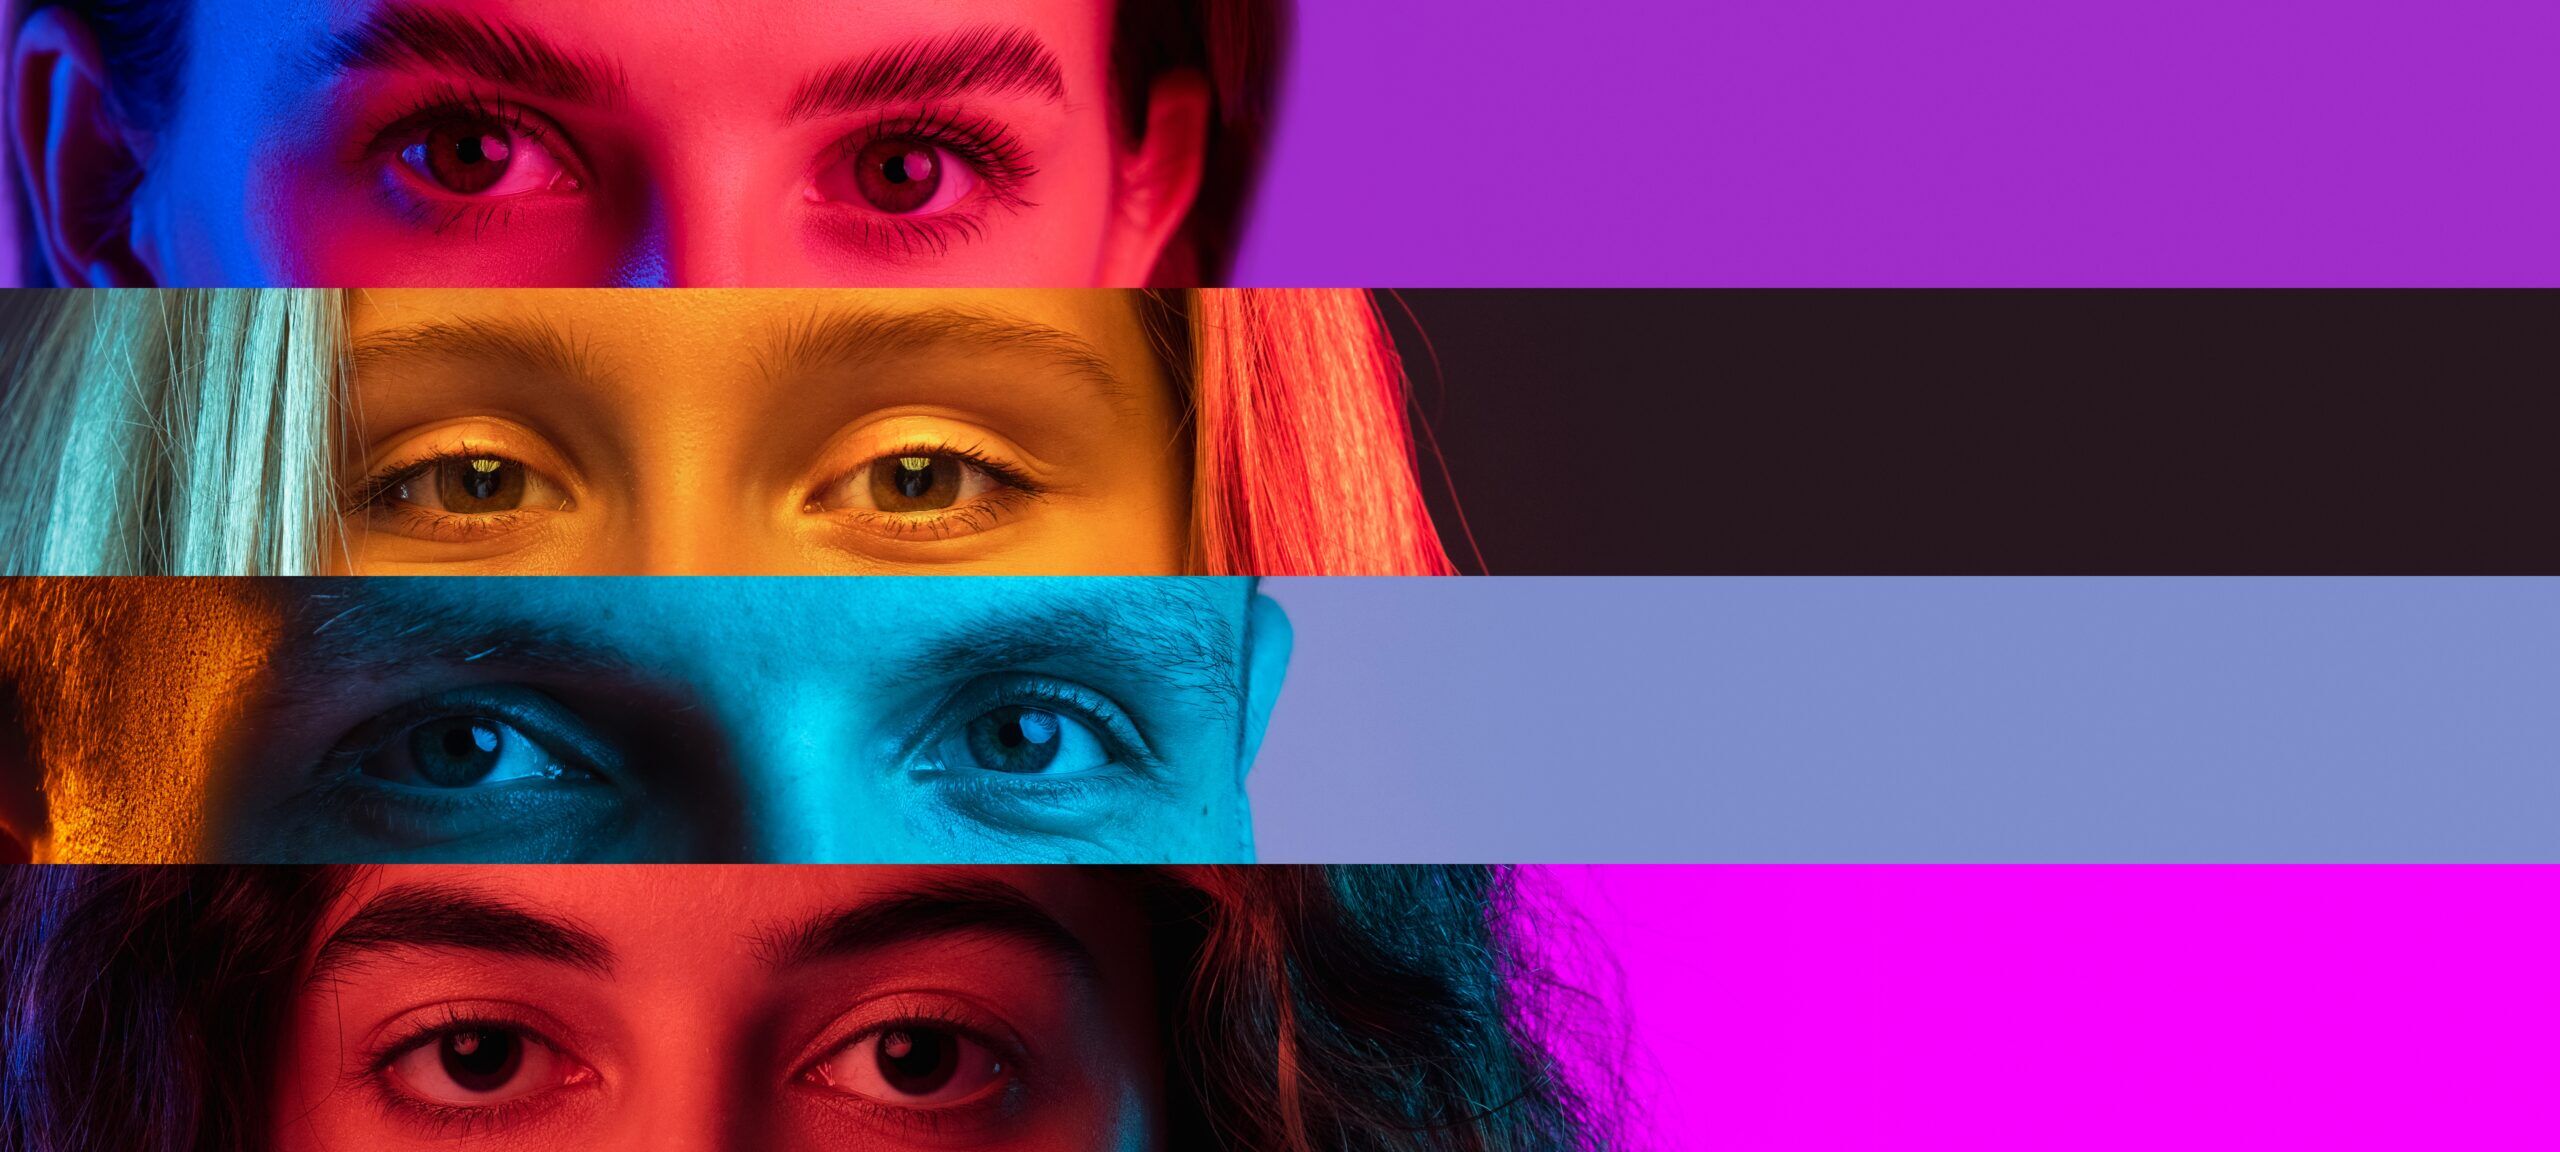 Collage of close-up male and female eyes isolated on colored backgorund. Multicolored stripes. Flyer with copy space for ads. Concept of equality, unification of all nations, ages and interests